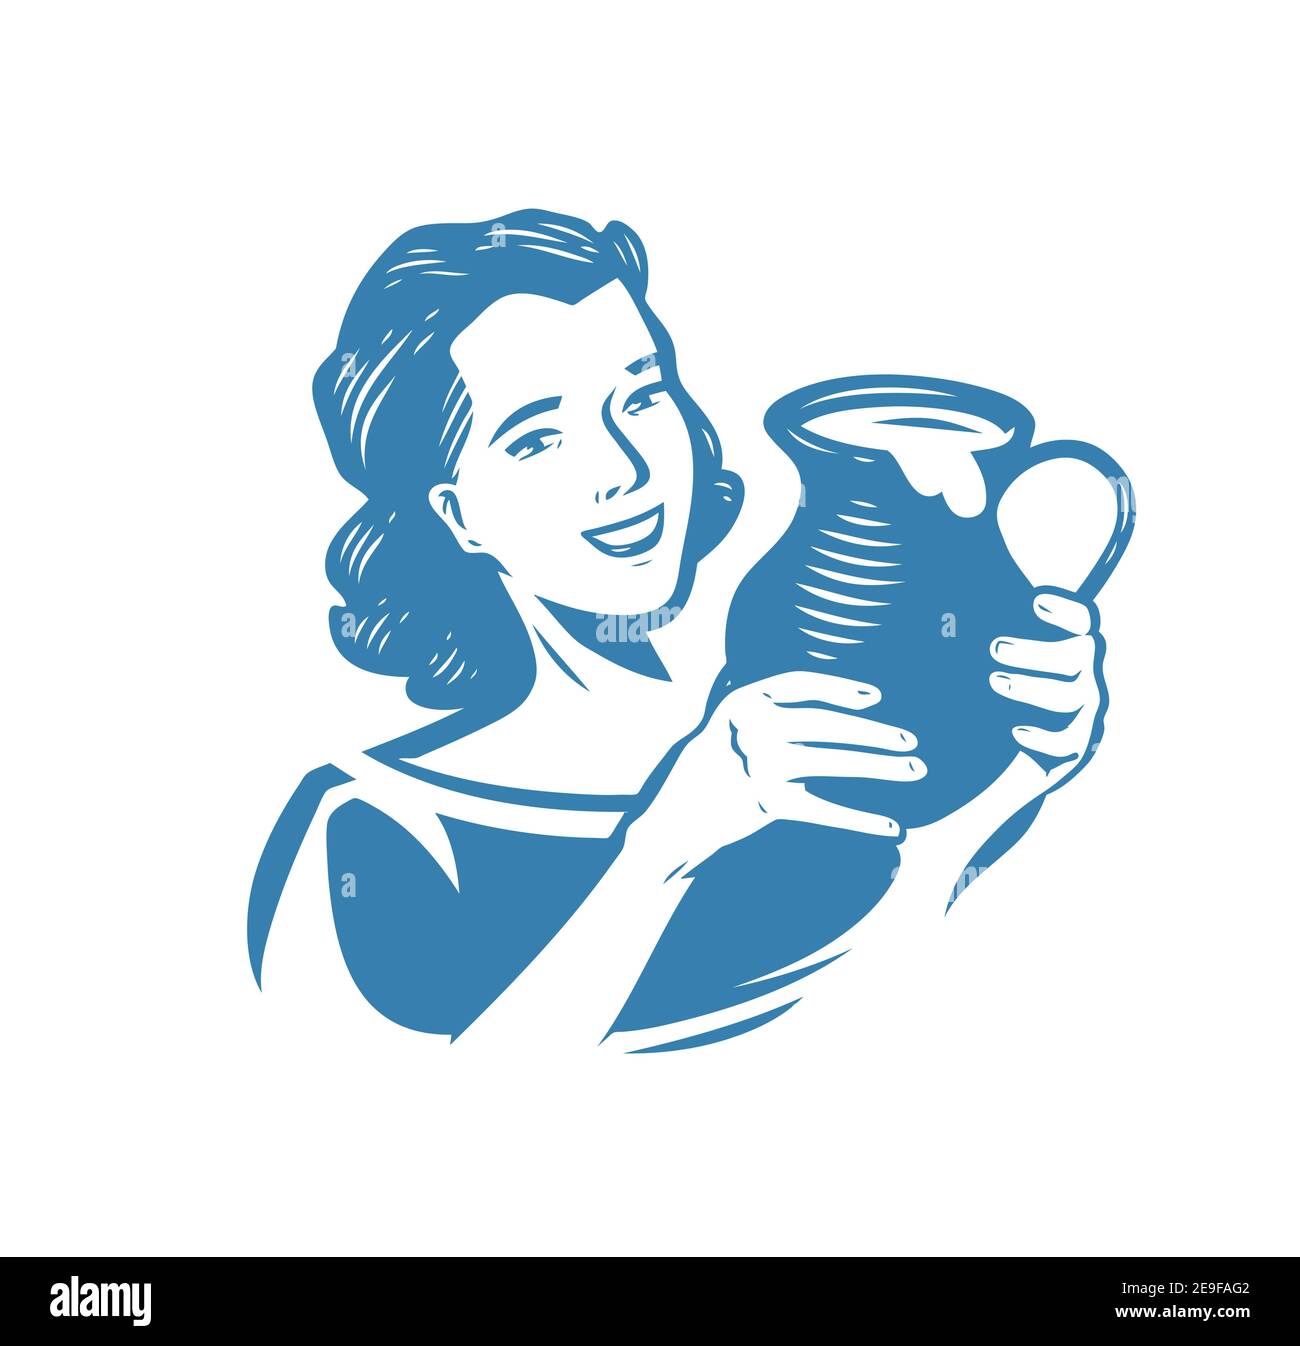 Milkmaid with jug of milk. Dairy products symbol or logo vector Stock Vector